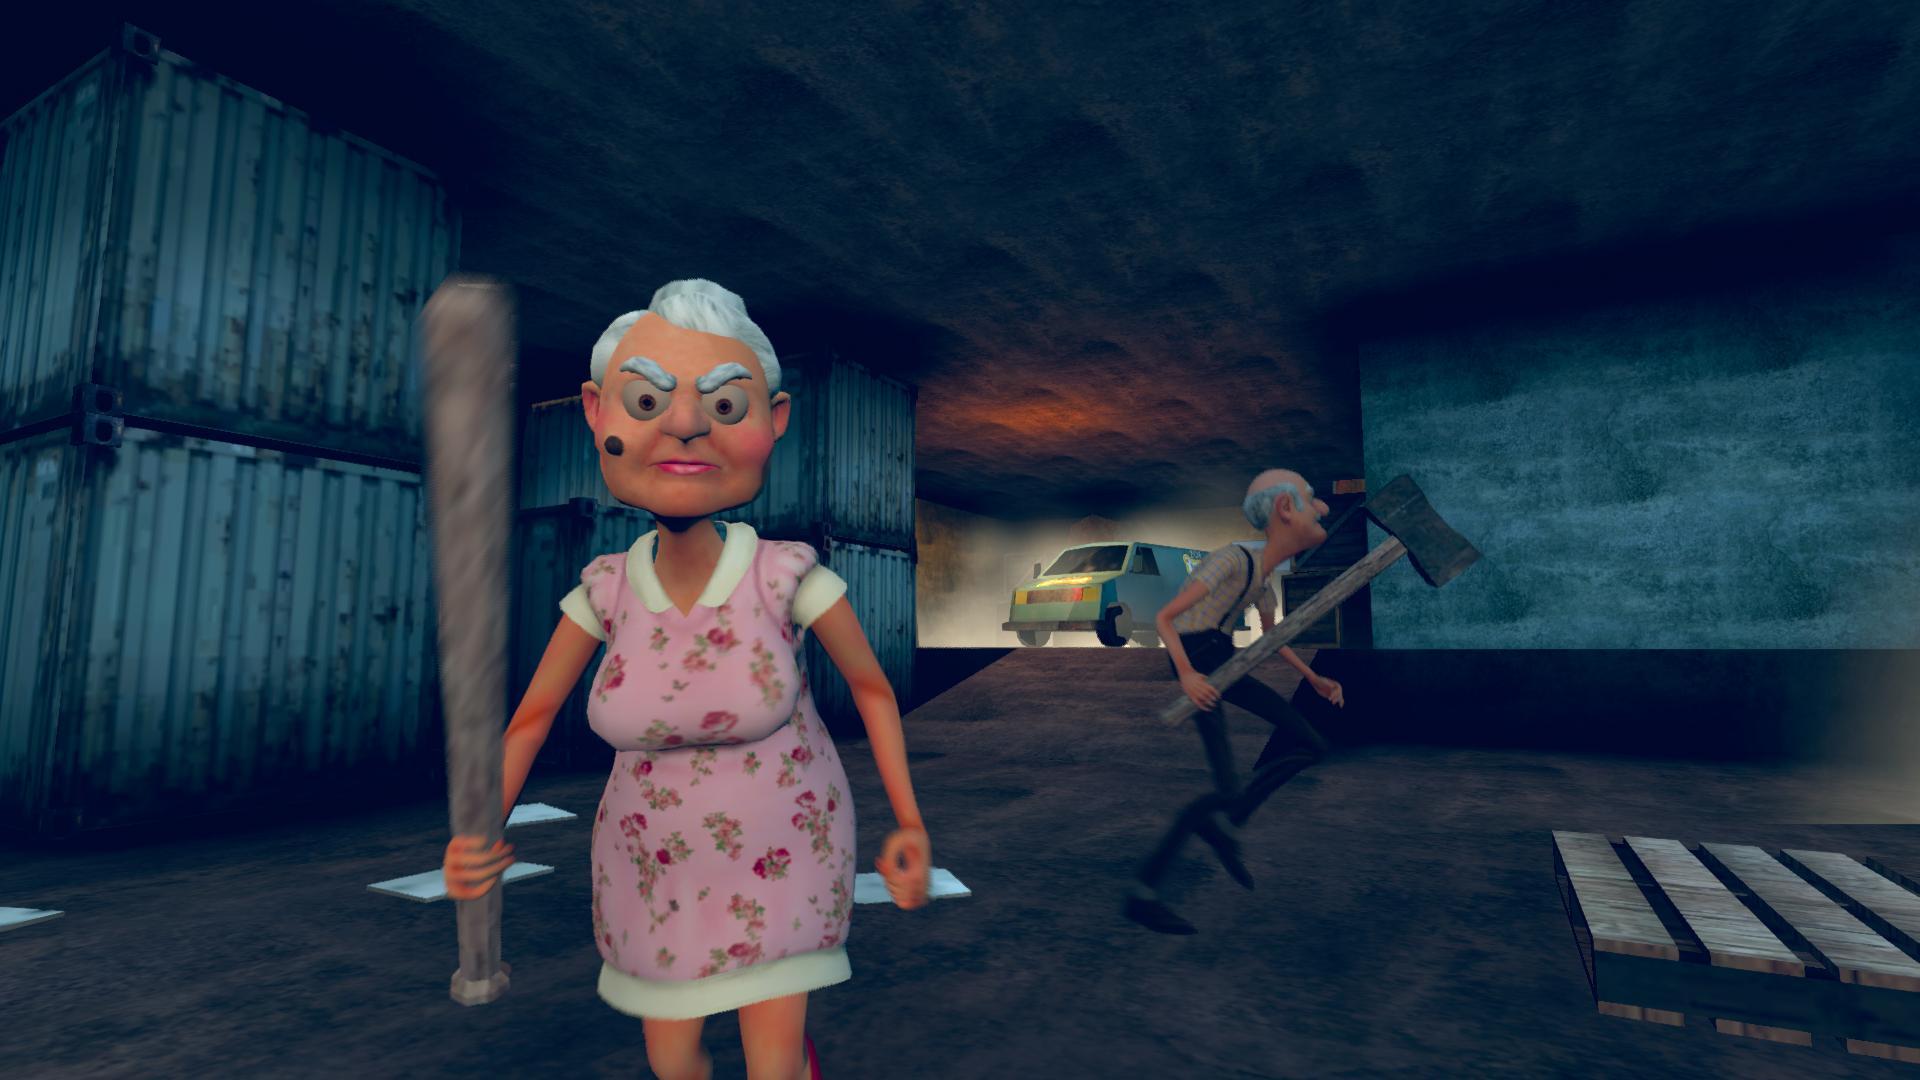 granny house online game  Granny house, Anime, Character